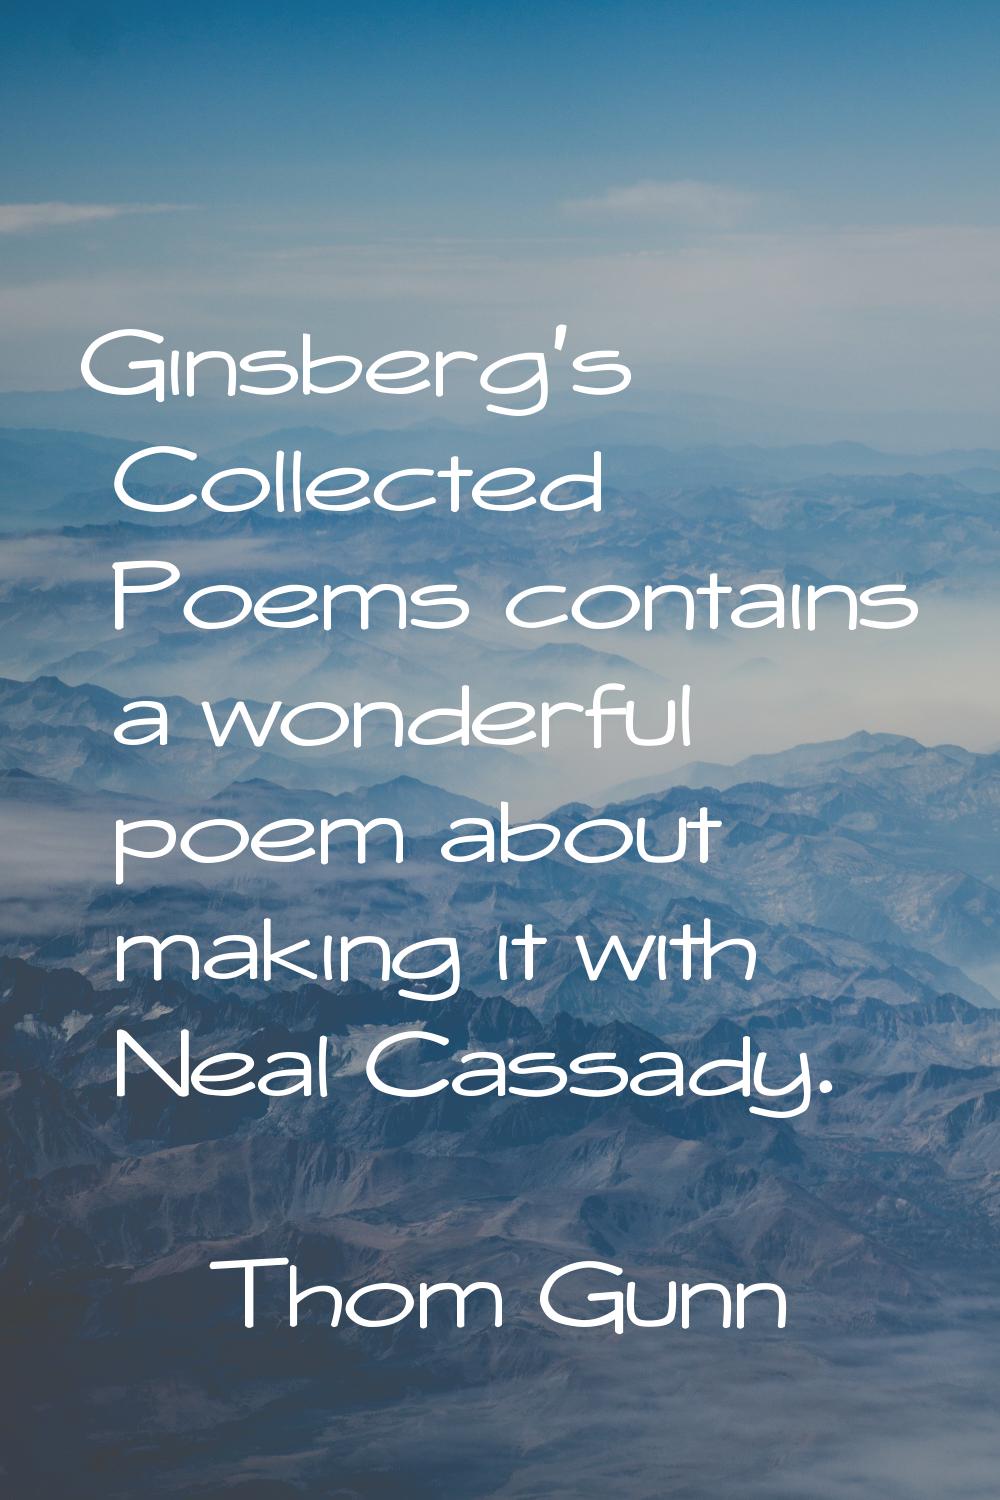 Ginsberg's Collected Poems contains a wonderful poem about making it with Neal Cassady.